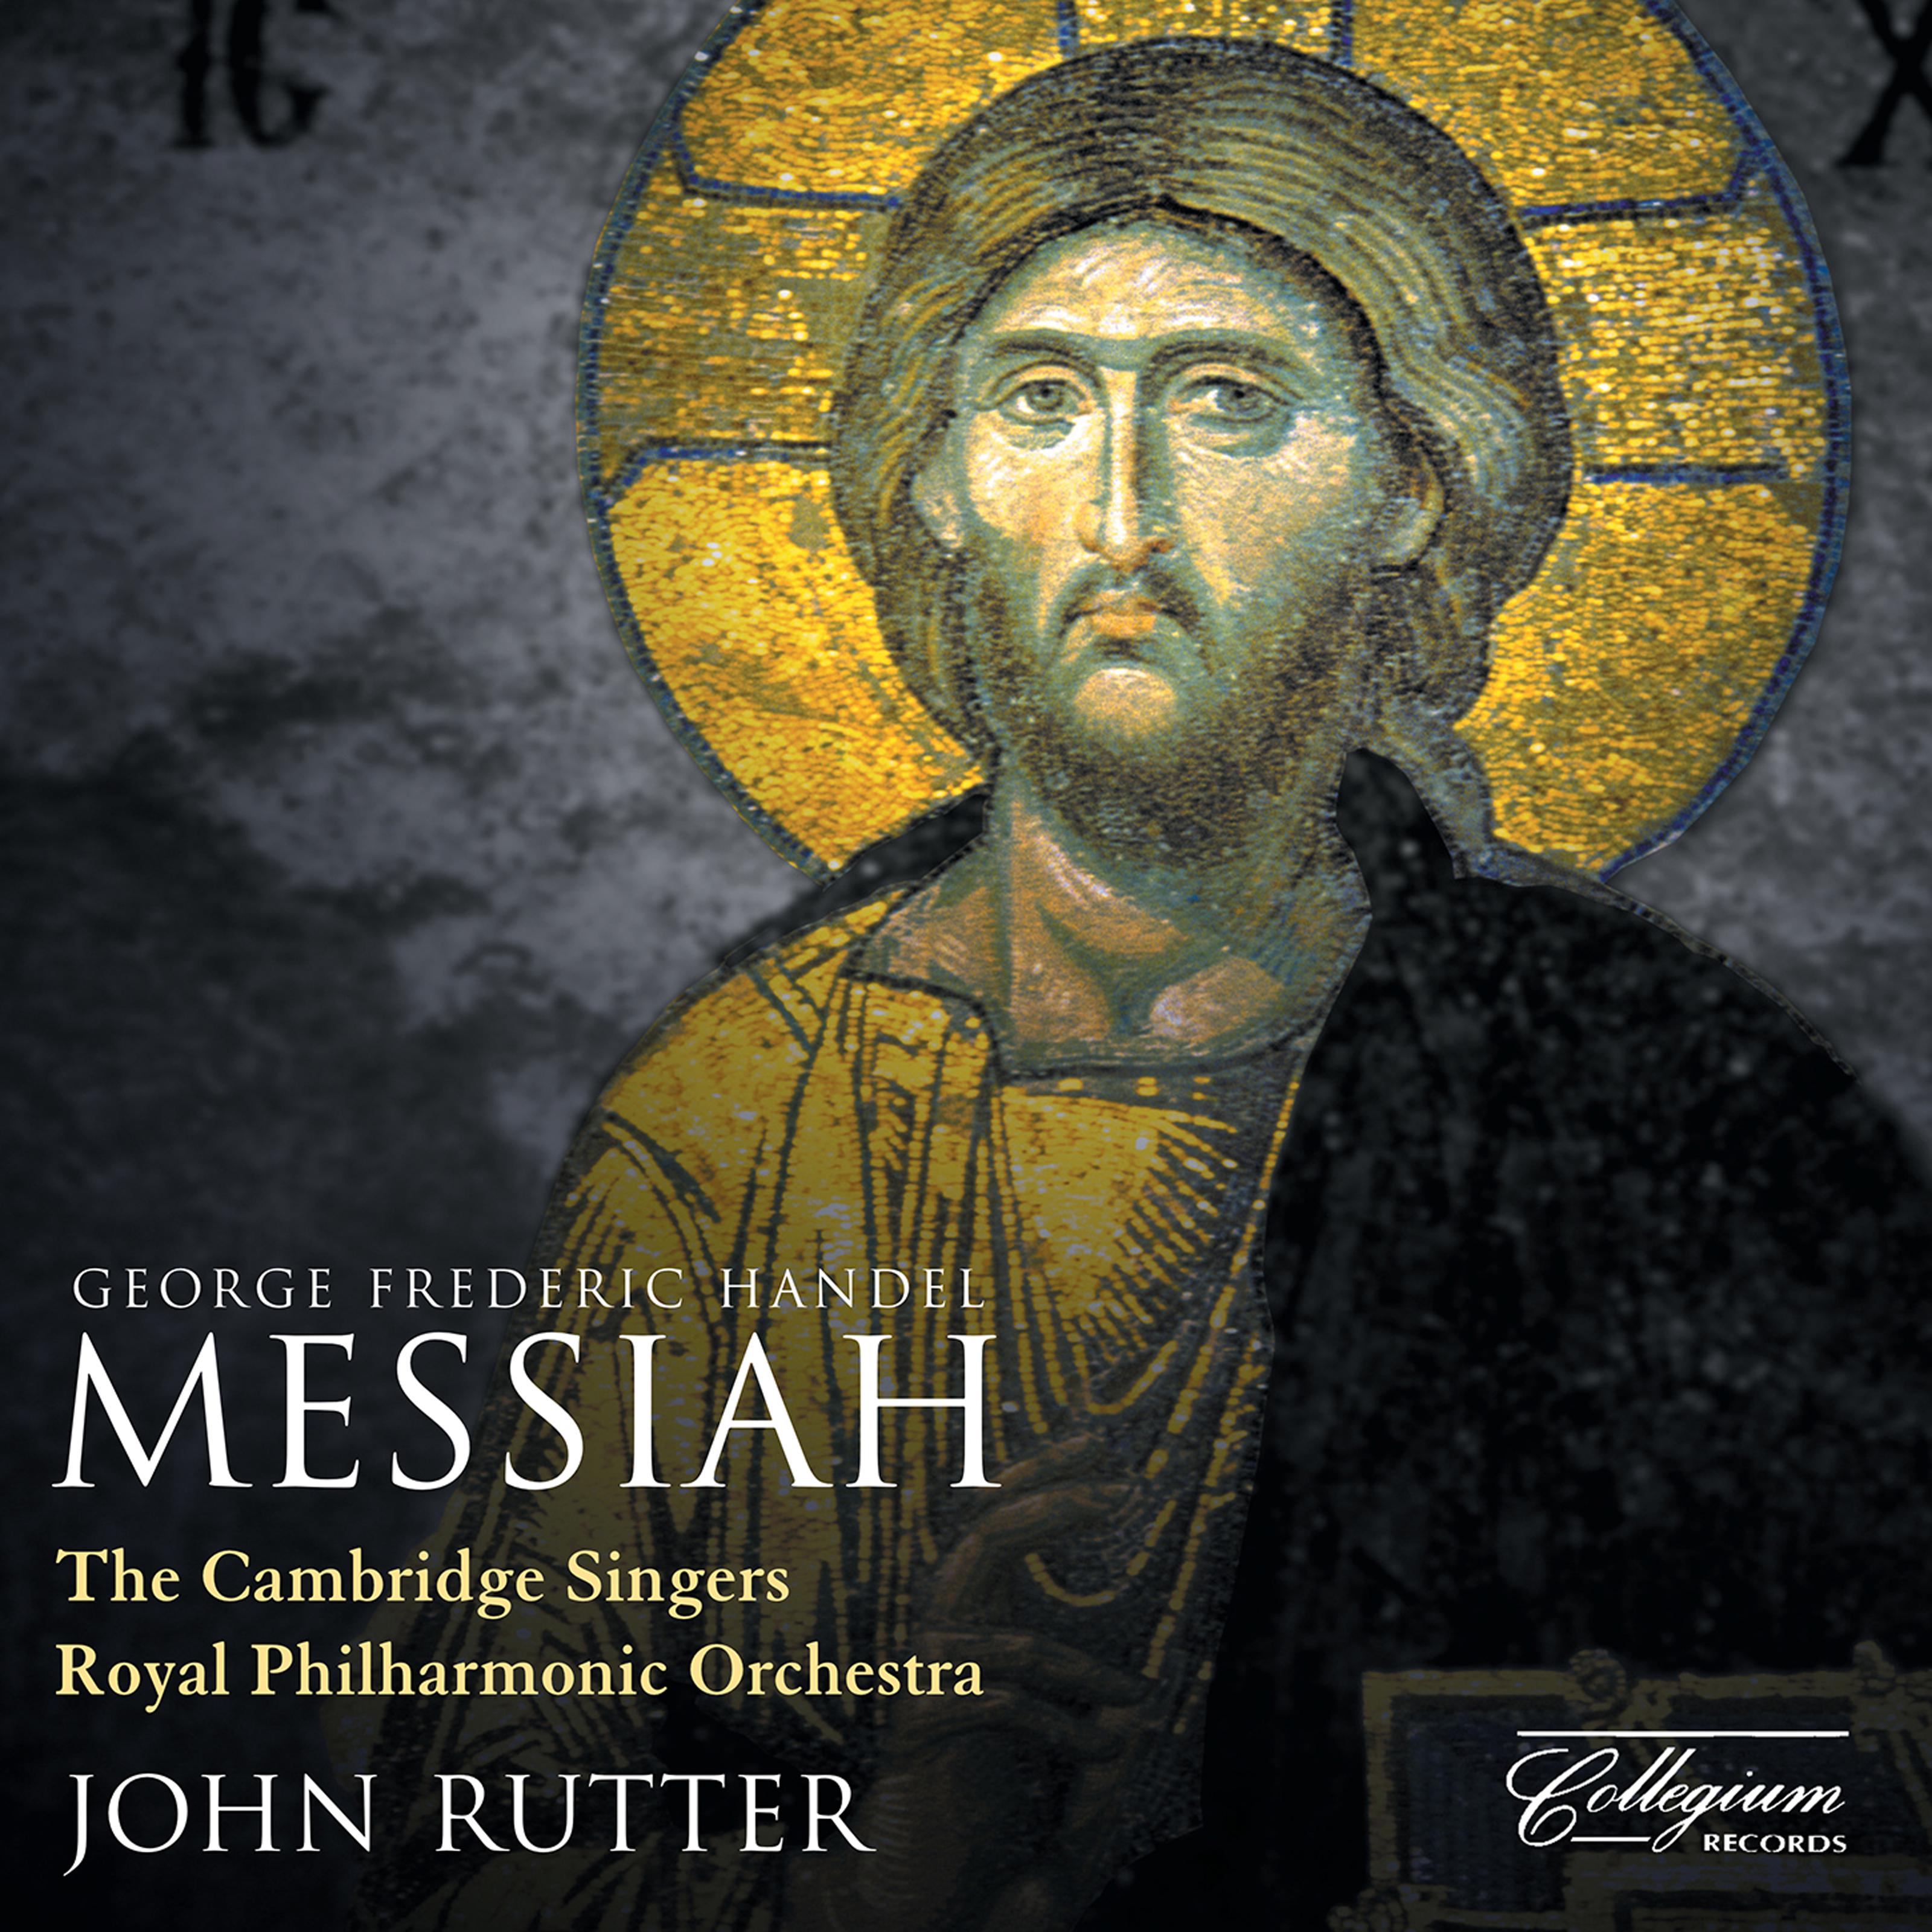 John Rutter - Messiah, HWV 56, Pt. 2:No. 28, He Trusted in God That He Would Deliver Him